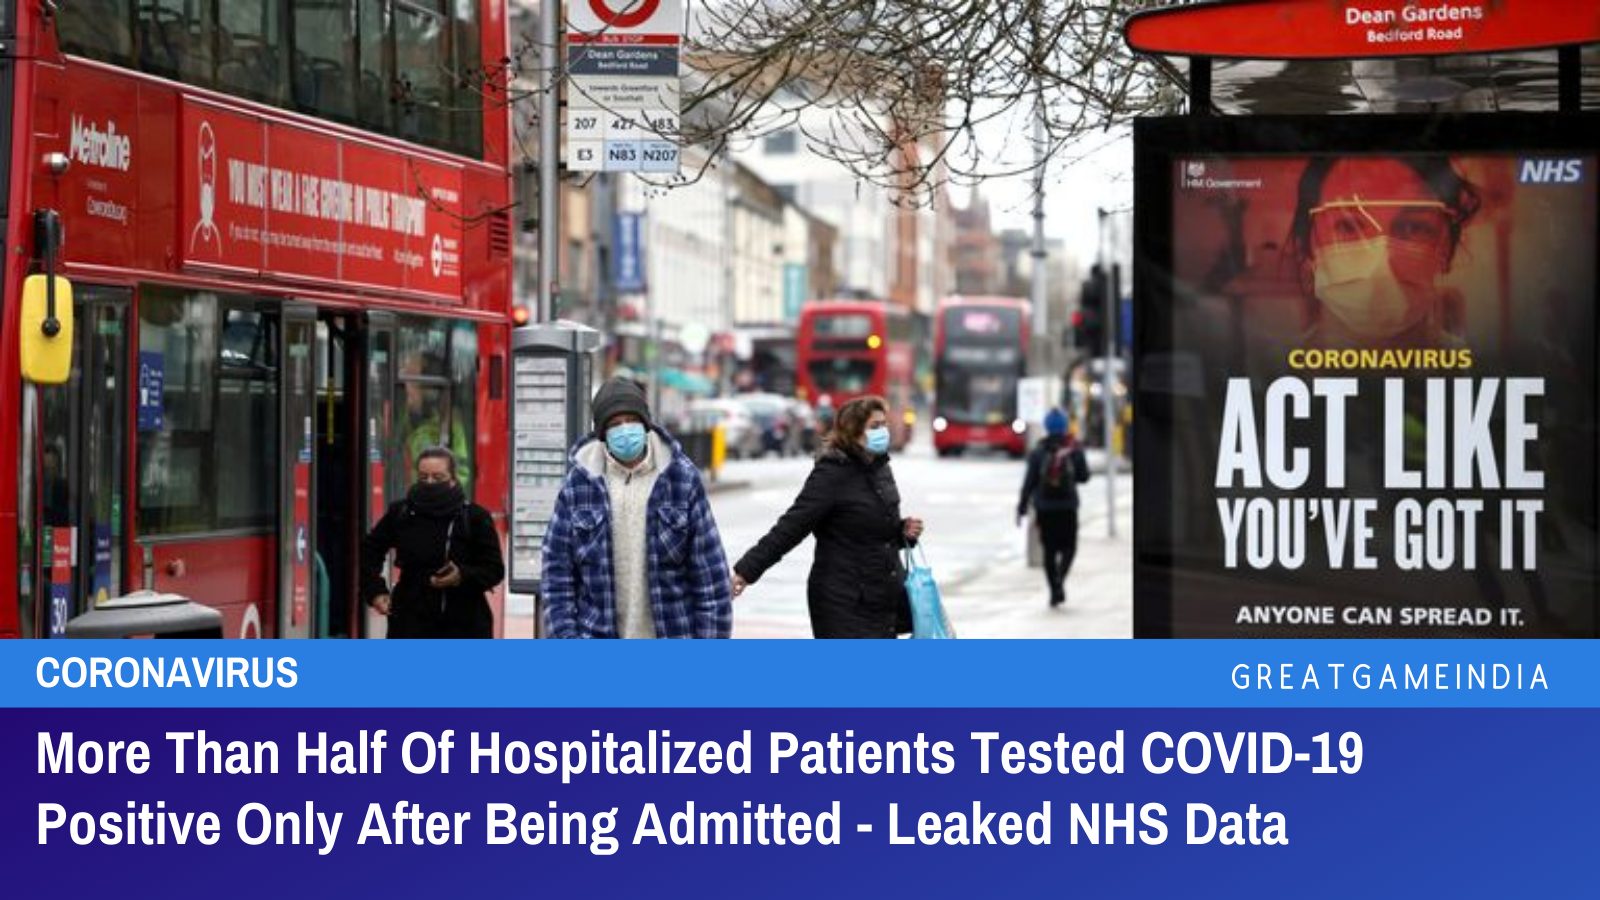 More Than Half Of Hospitalized Patients Tested COVID-19 Positive Only After Being Admitted - Leaked NHS Data